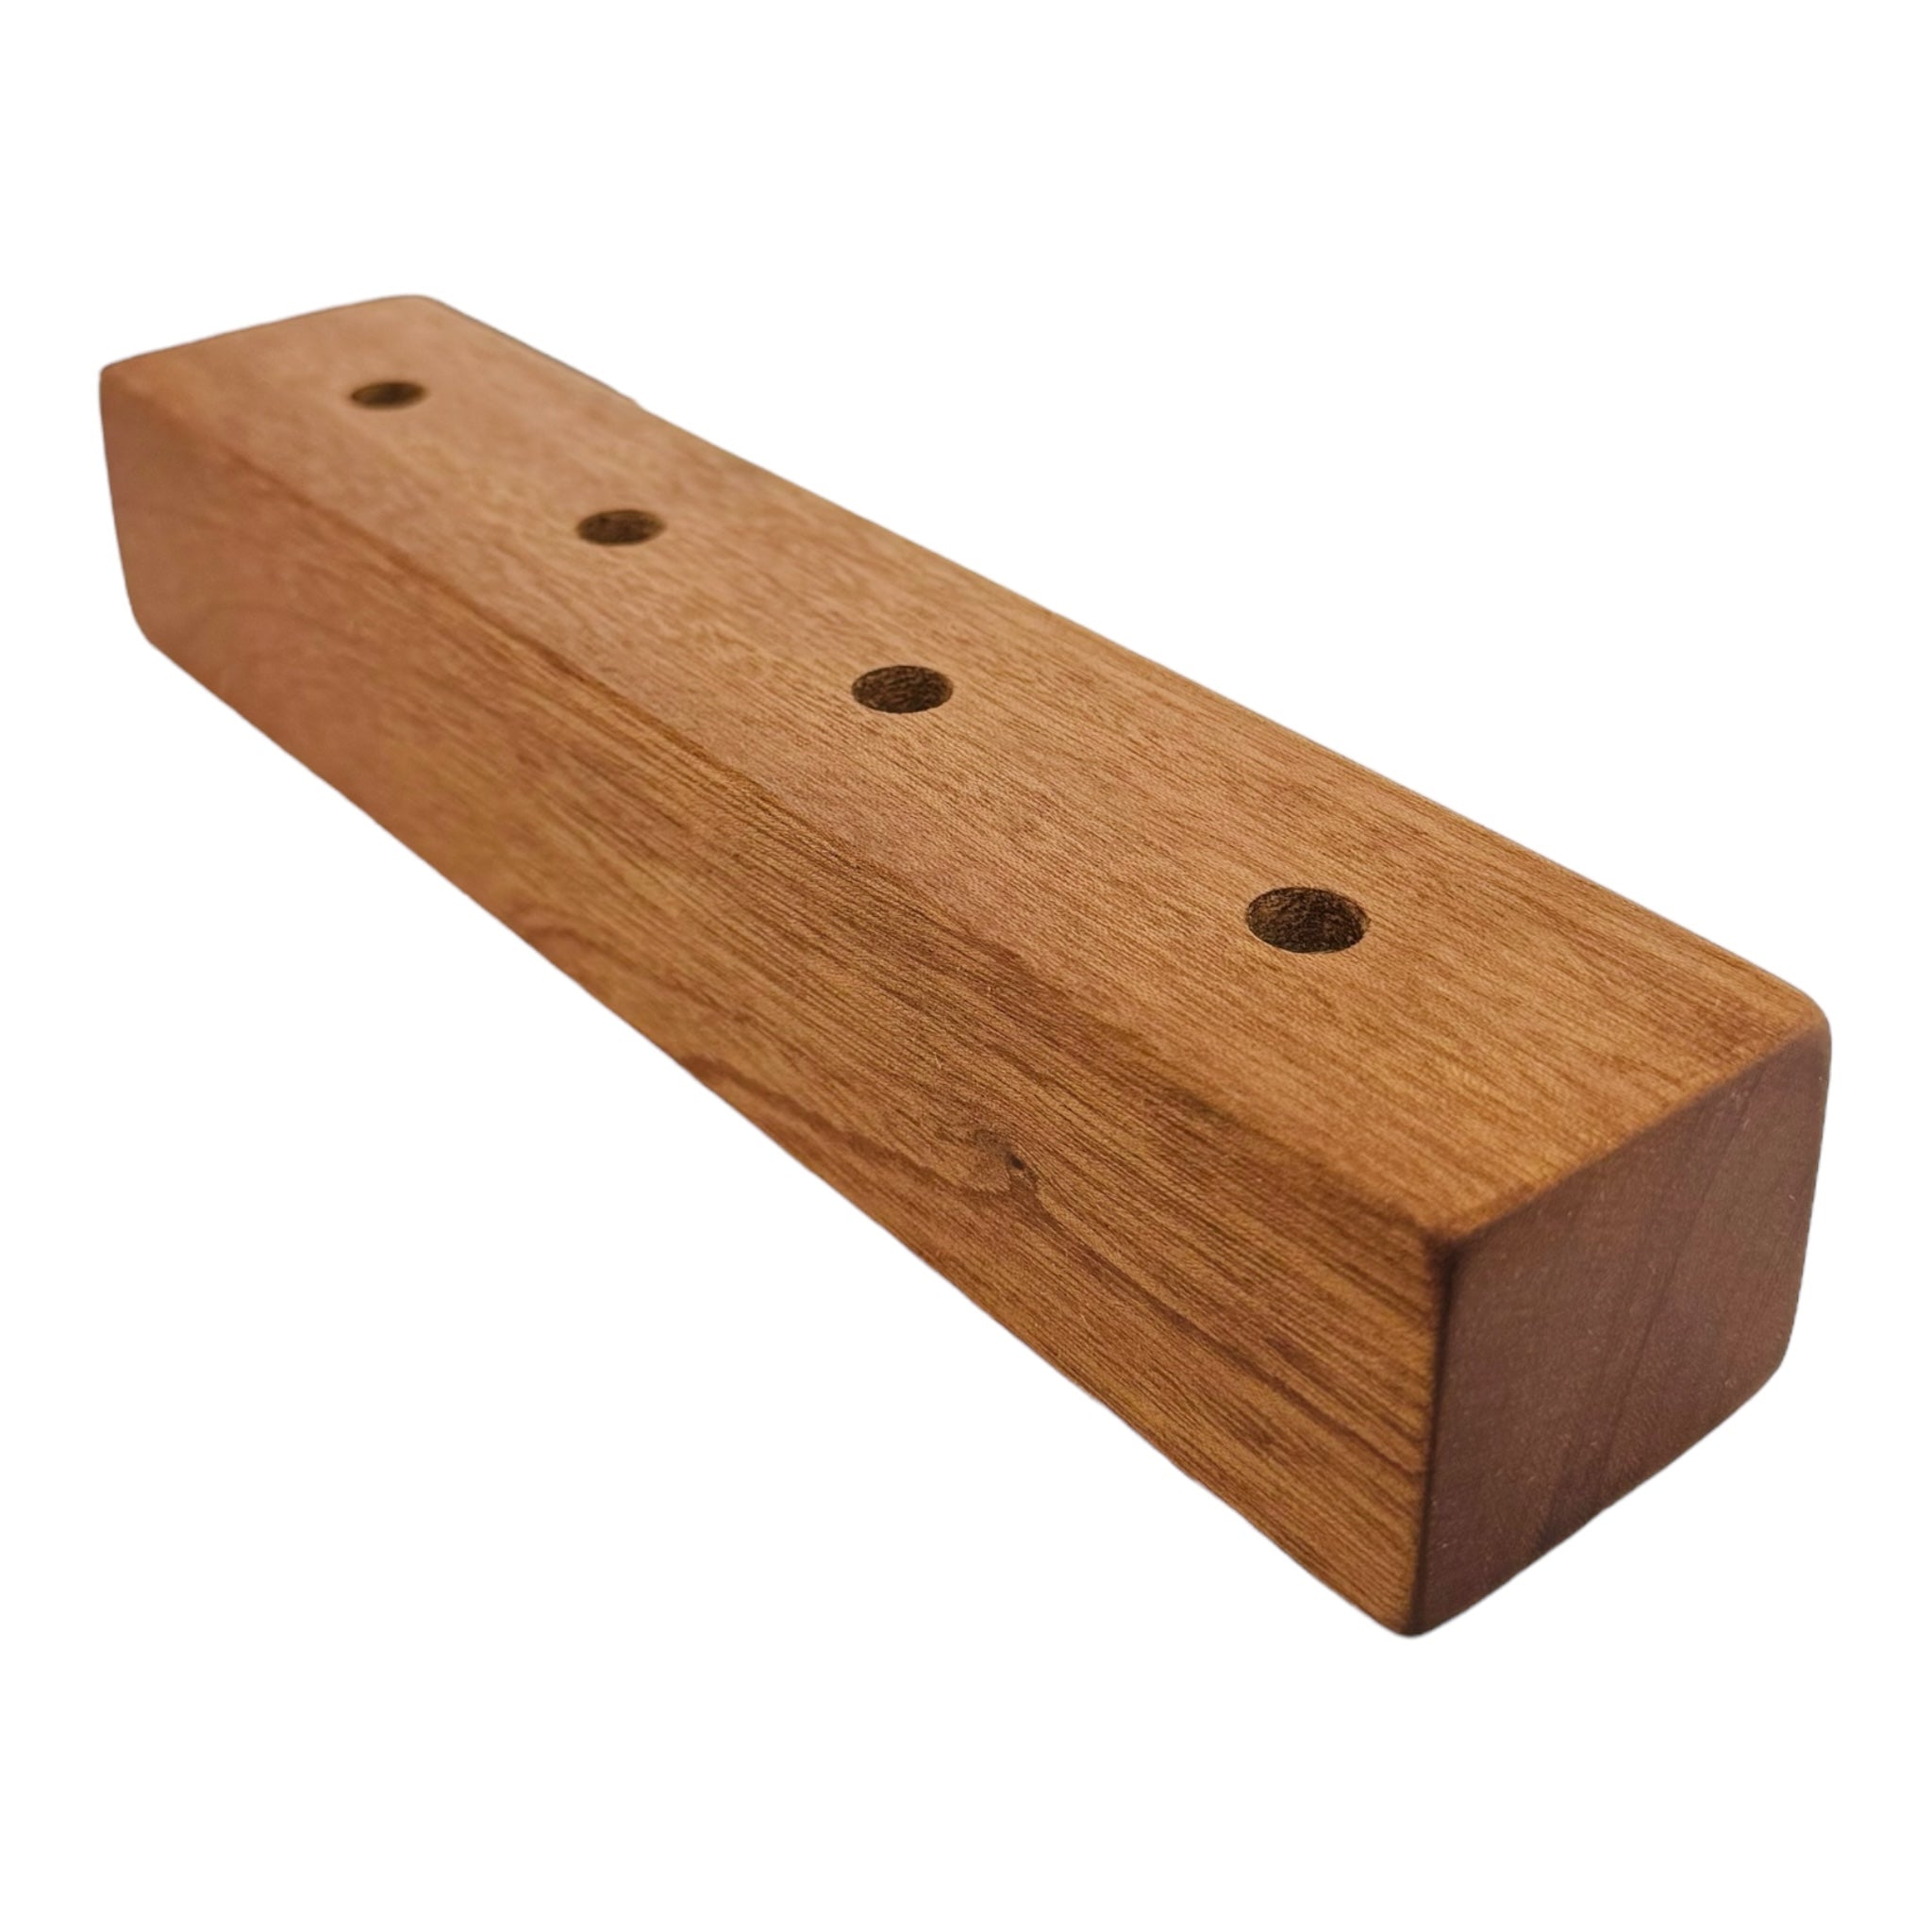 4 Hole Wood Display Stand Holder For 10mm Bong Bowl Pieces Or Quartz Bangers - Mahogany